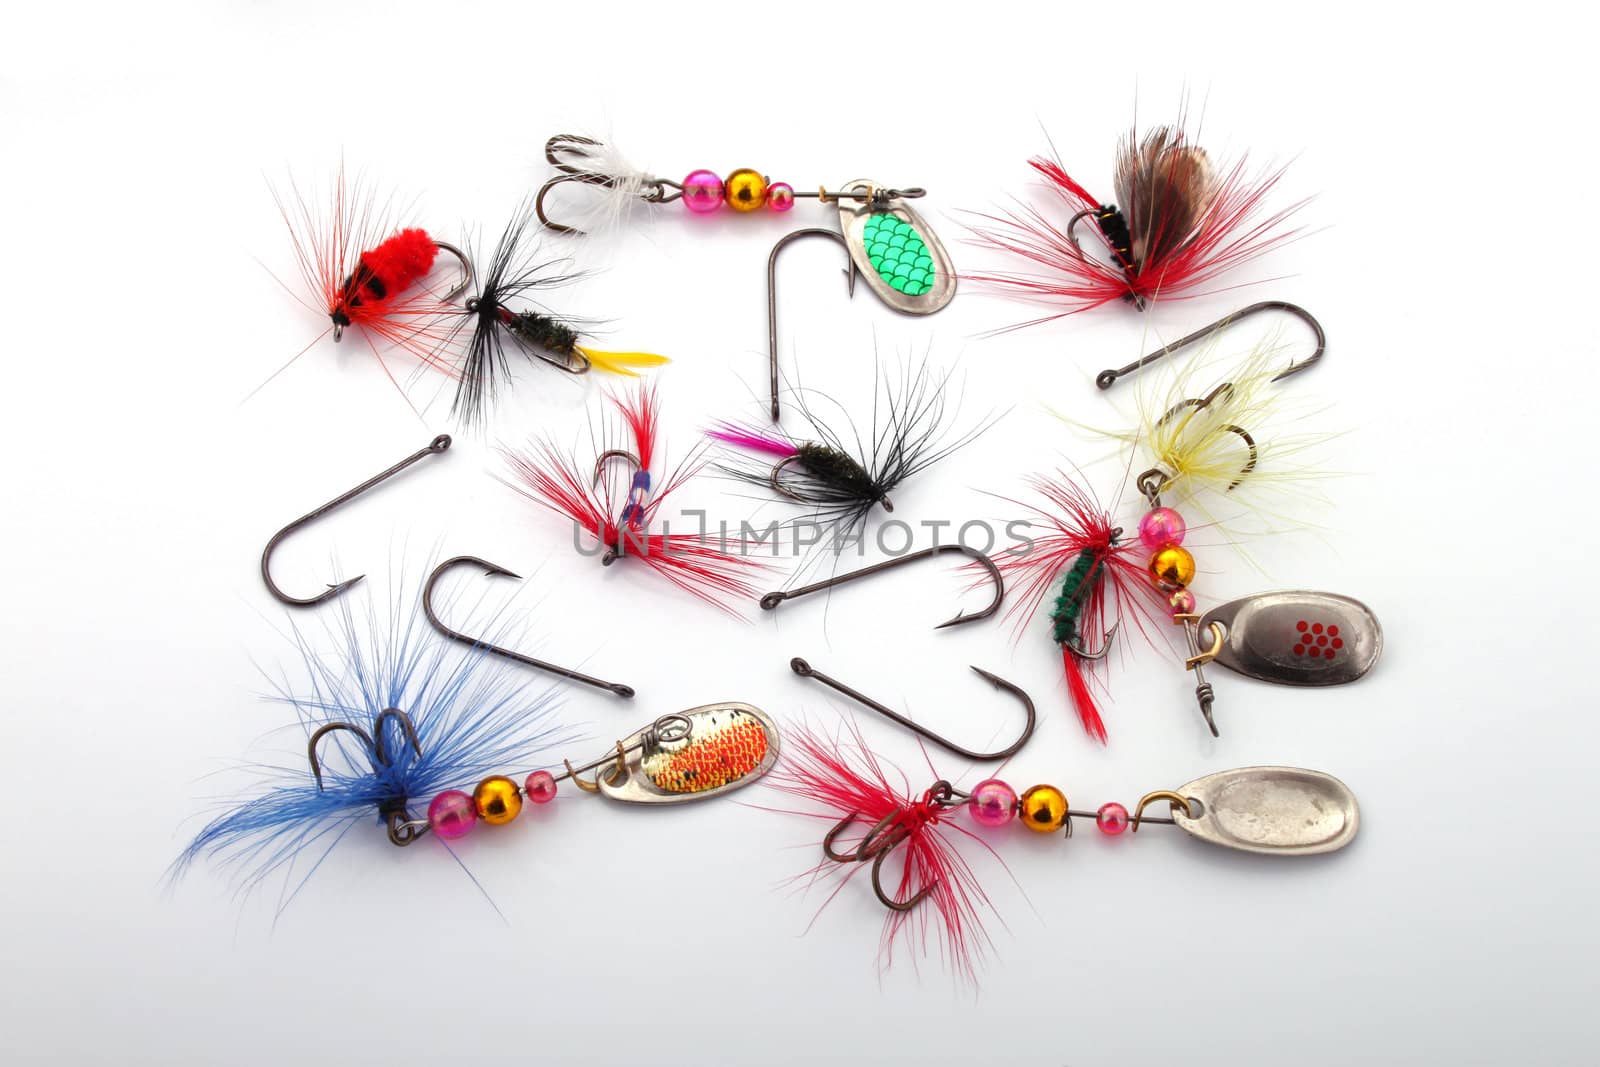 Fishing lures and hooks used by fishermen to catch fish.